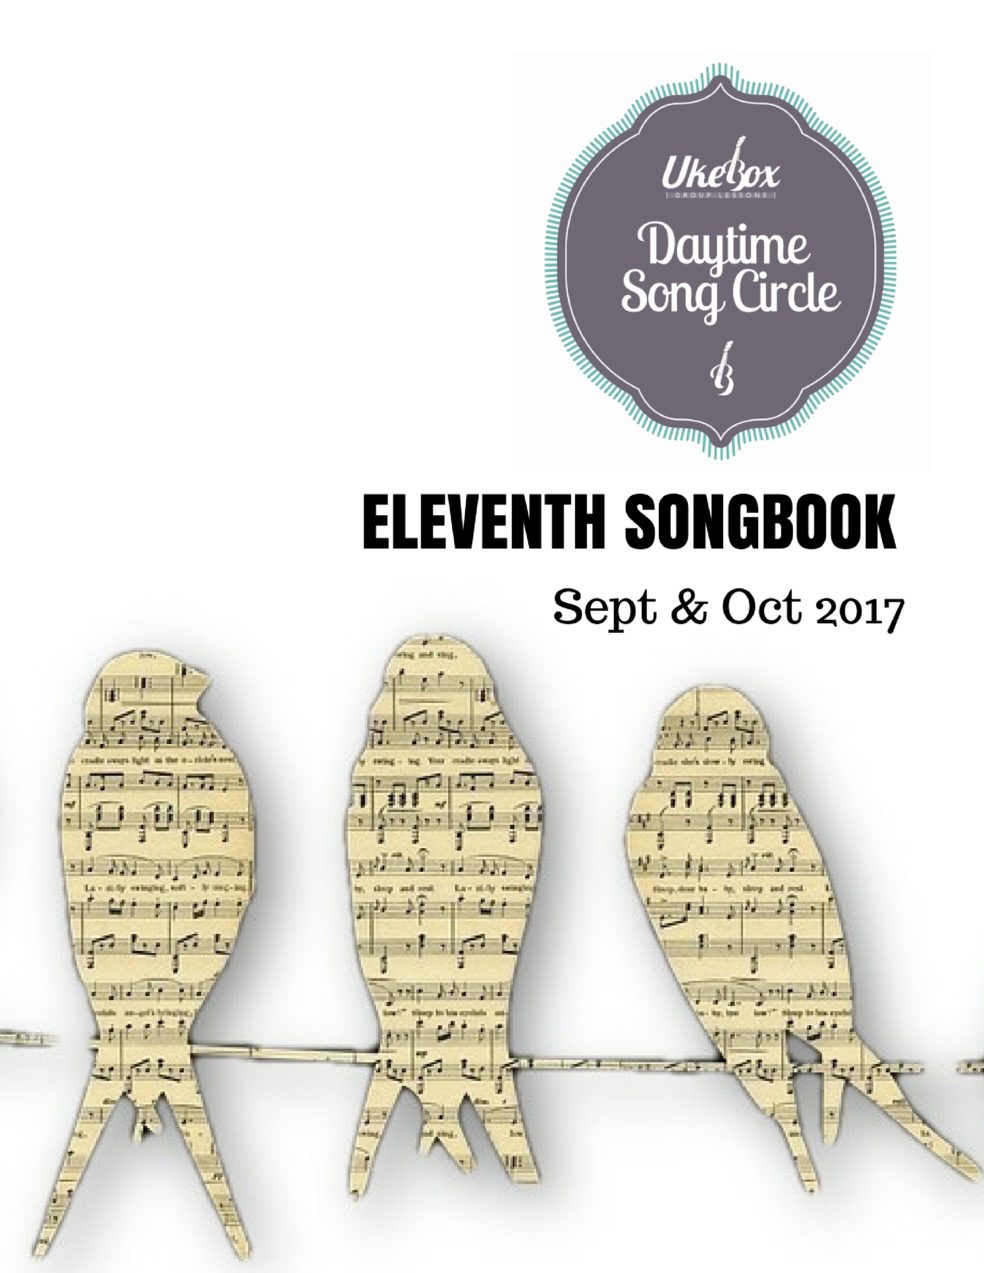 Songcircle Eleventh Songbook Sept Oct 2017